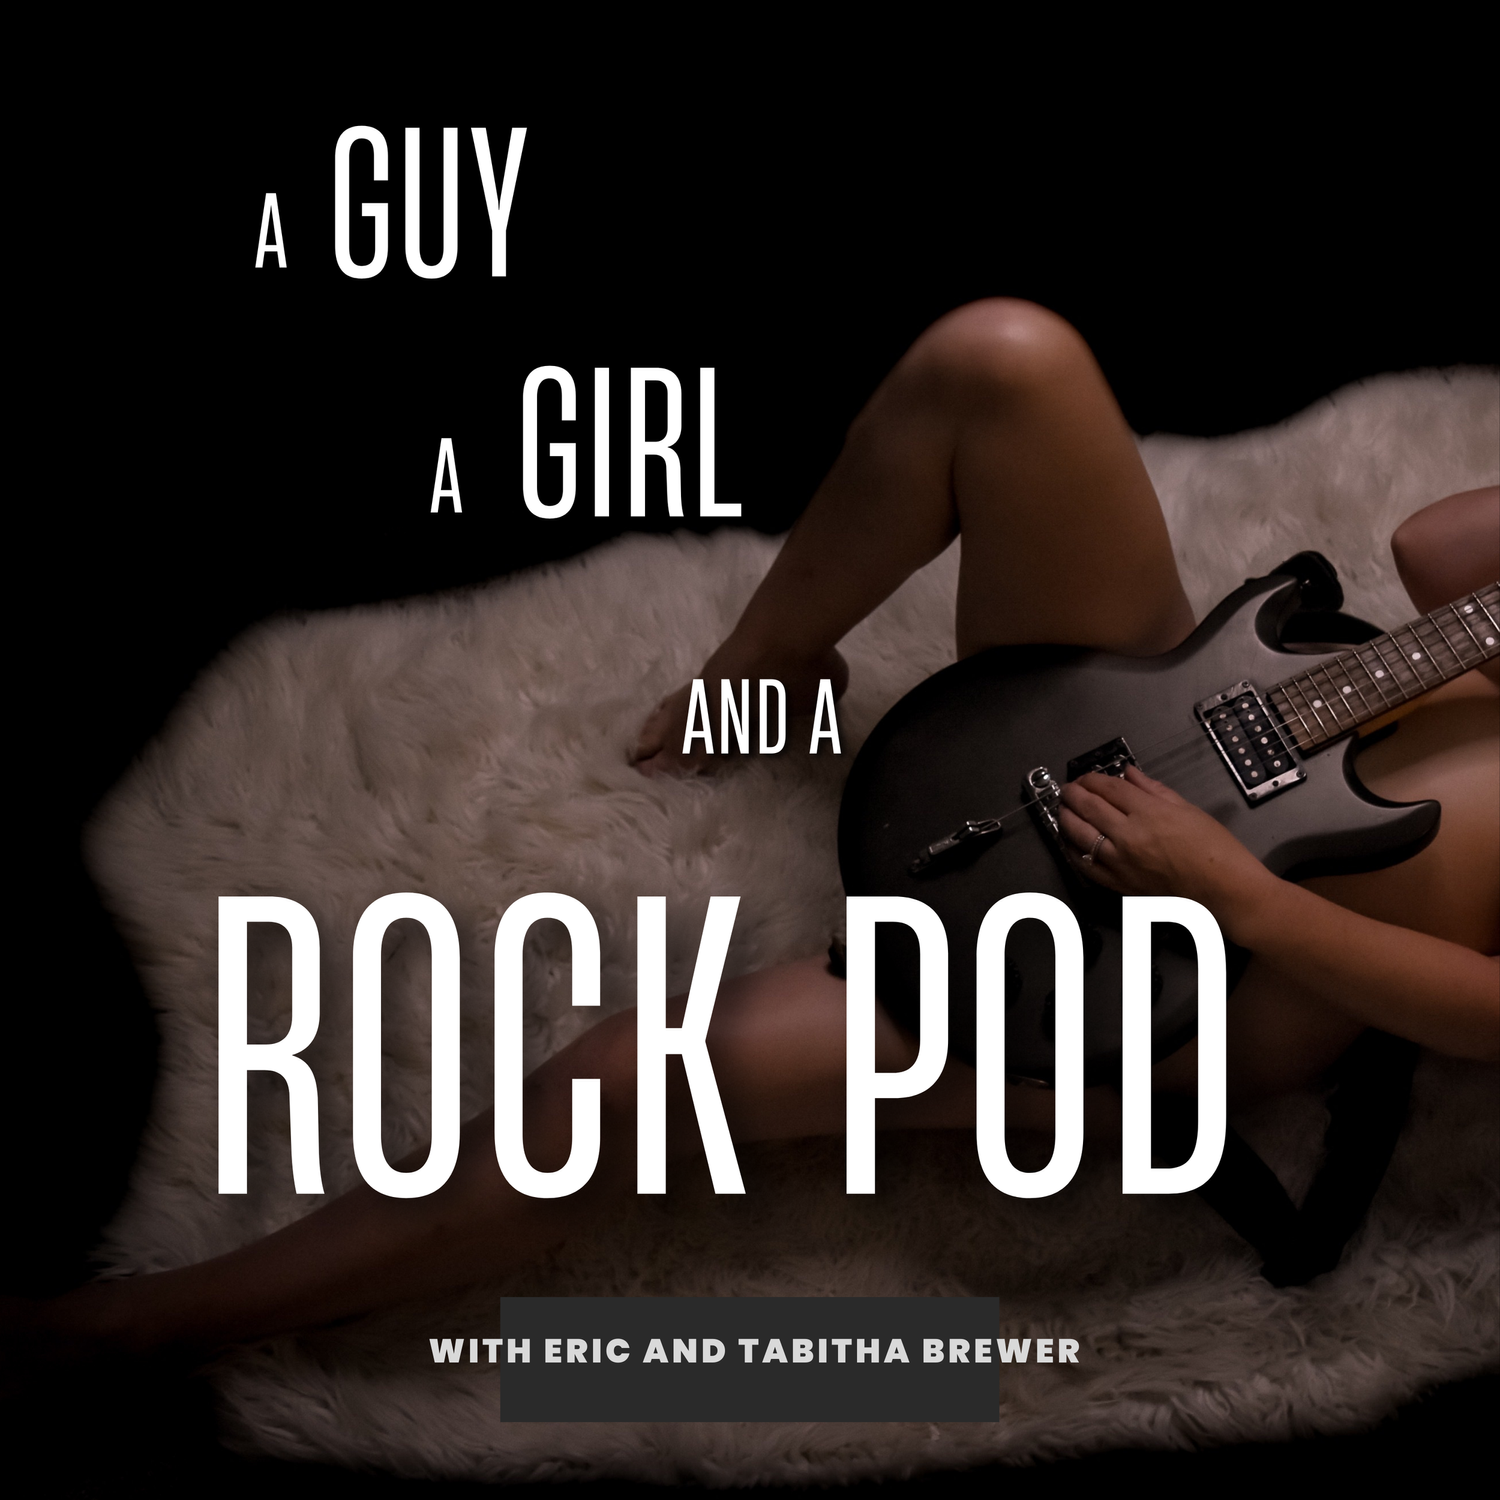 A Guy a Girl and a Rock Pod